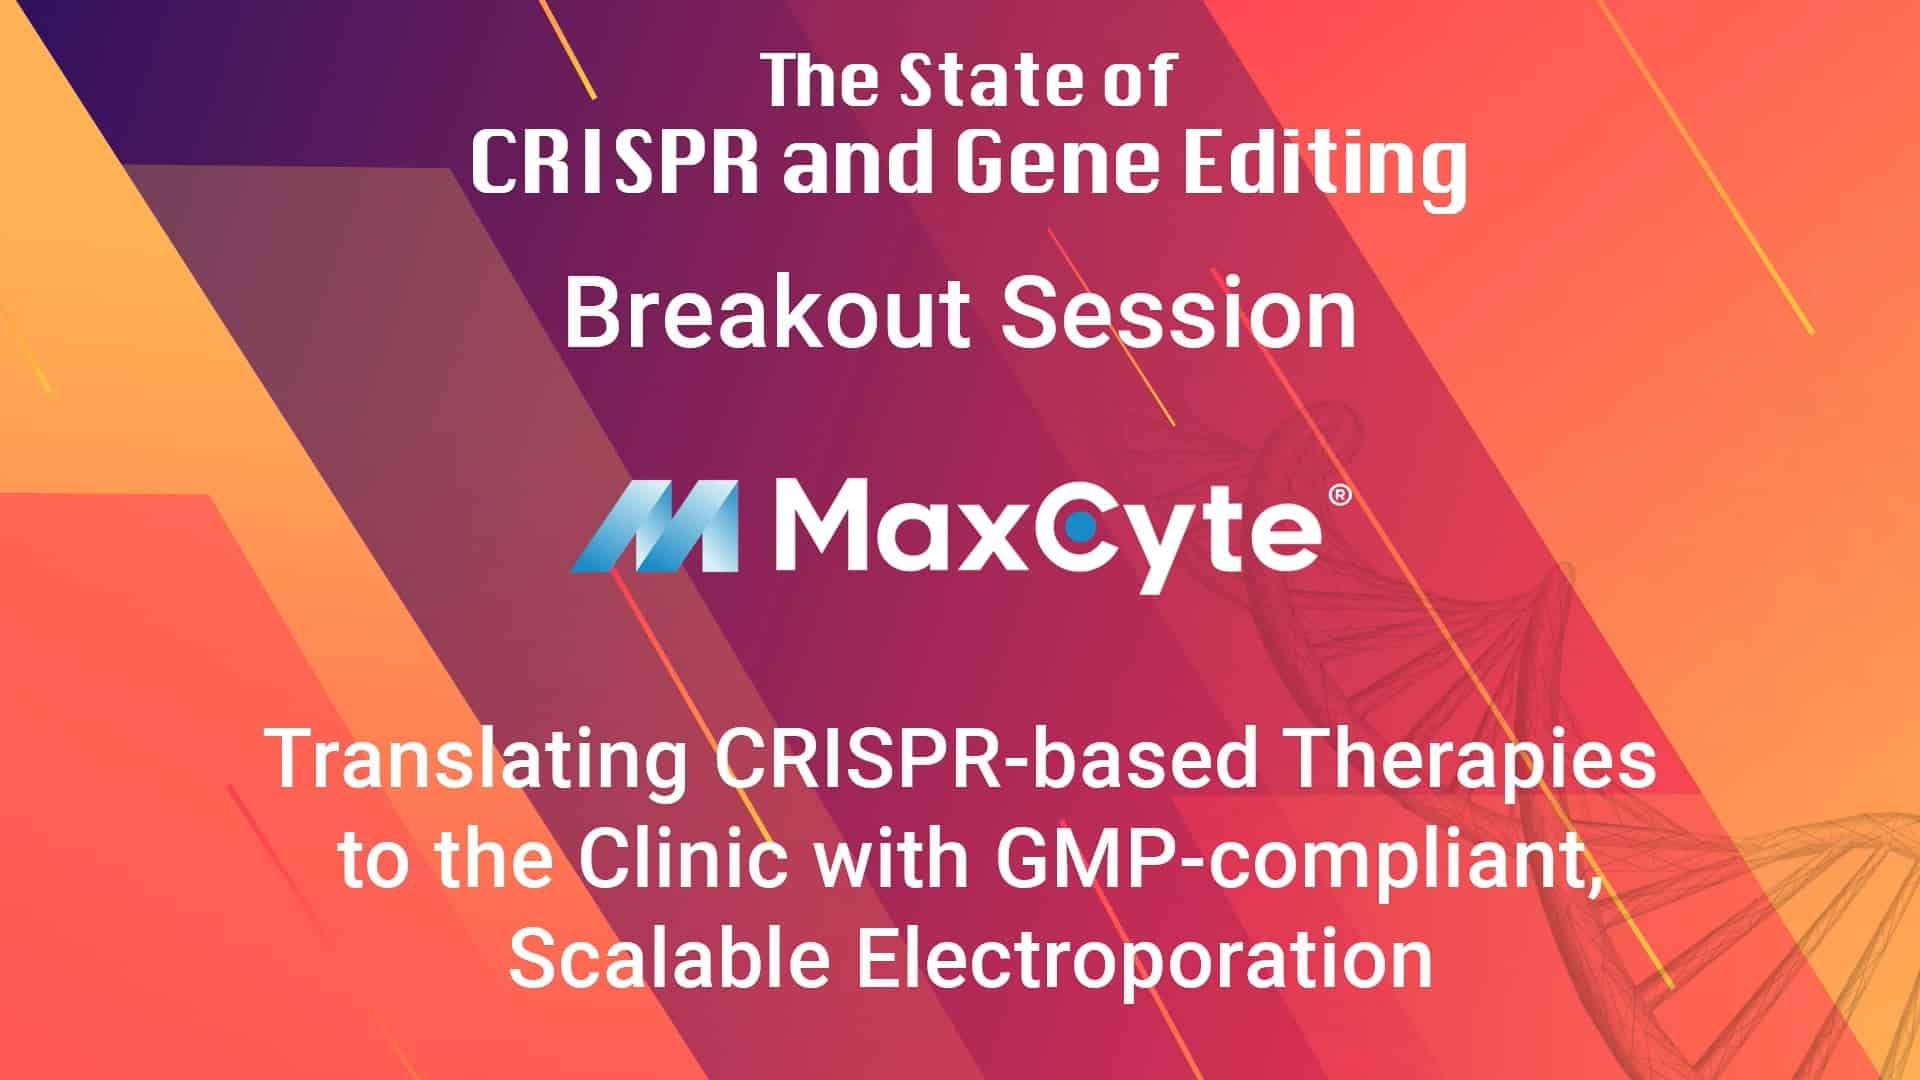 Cover slide of Translating CRISPR-based Therapies to the Clinic with GMP-compliant, Scalable Electroporation session